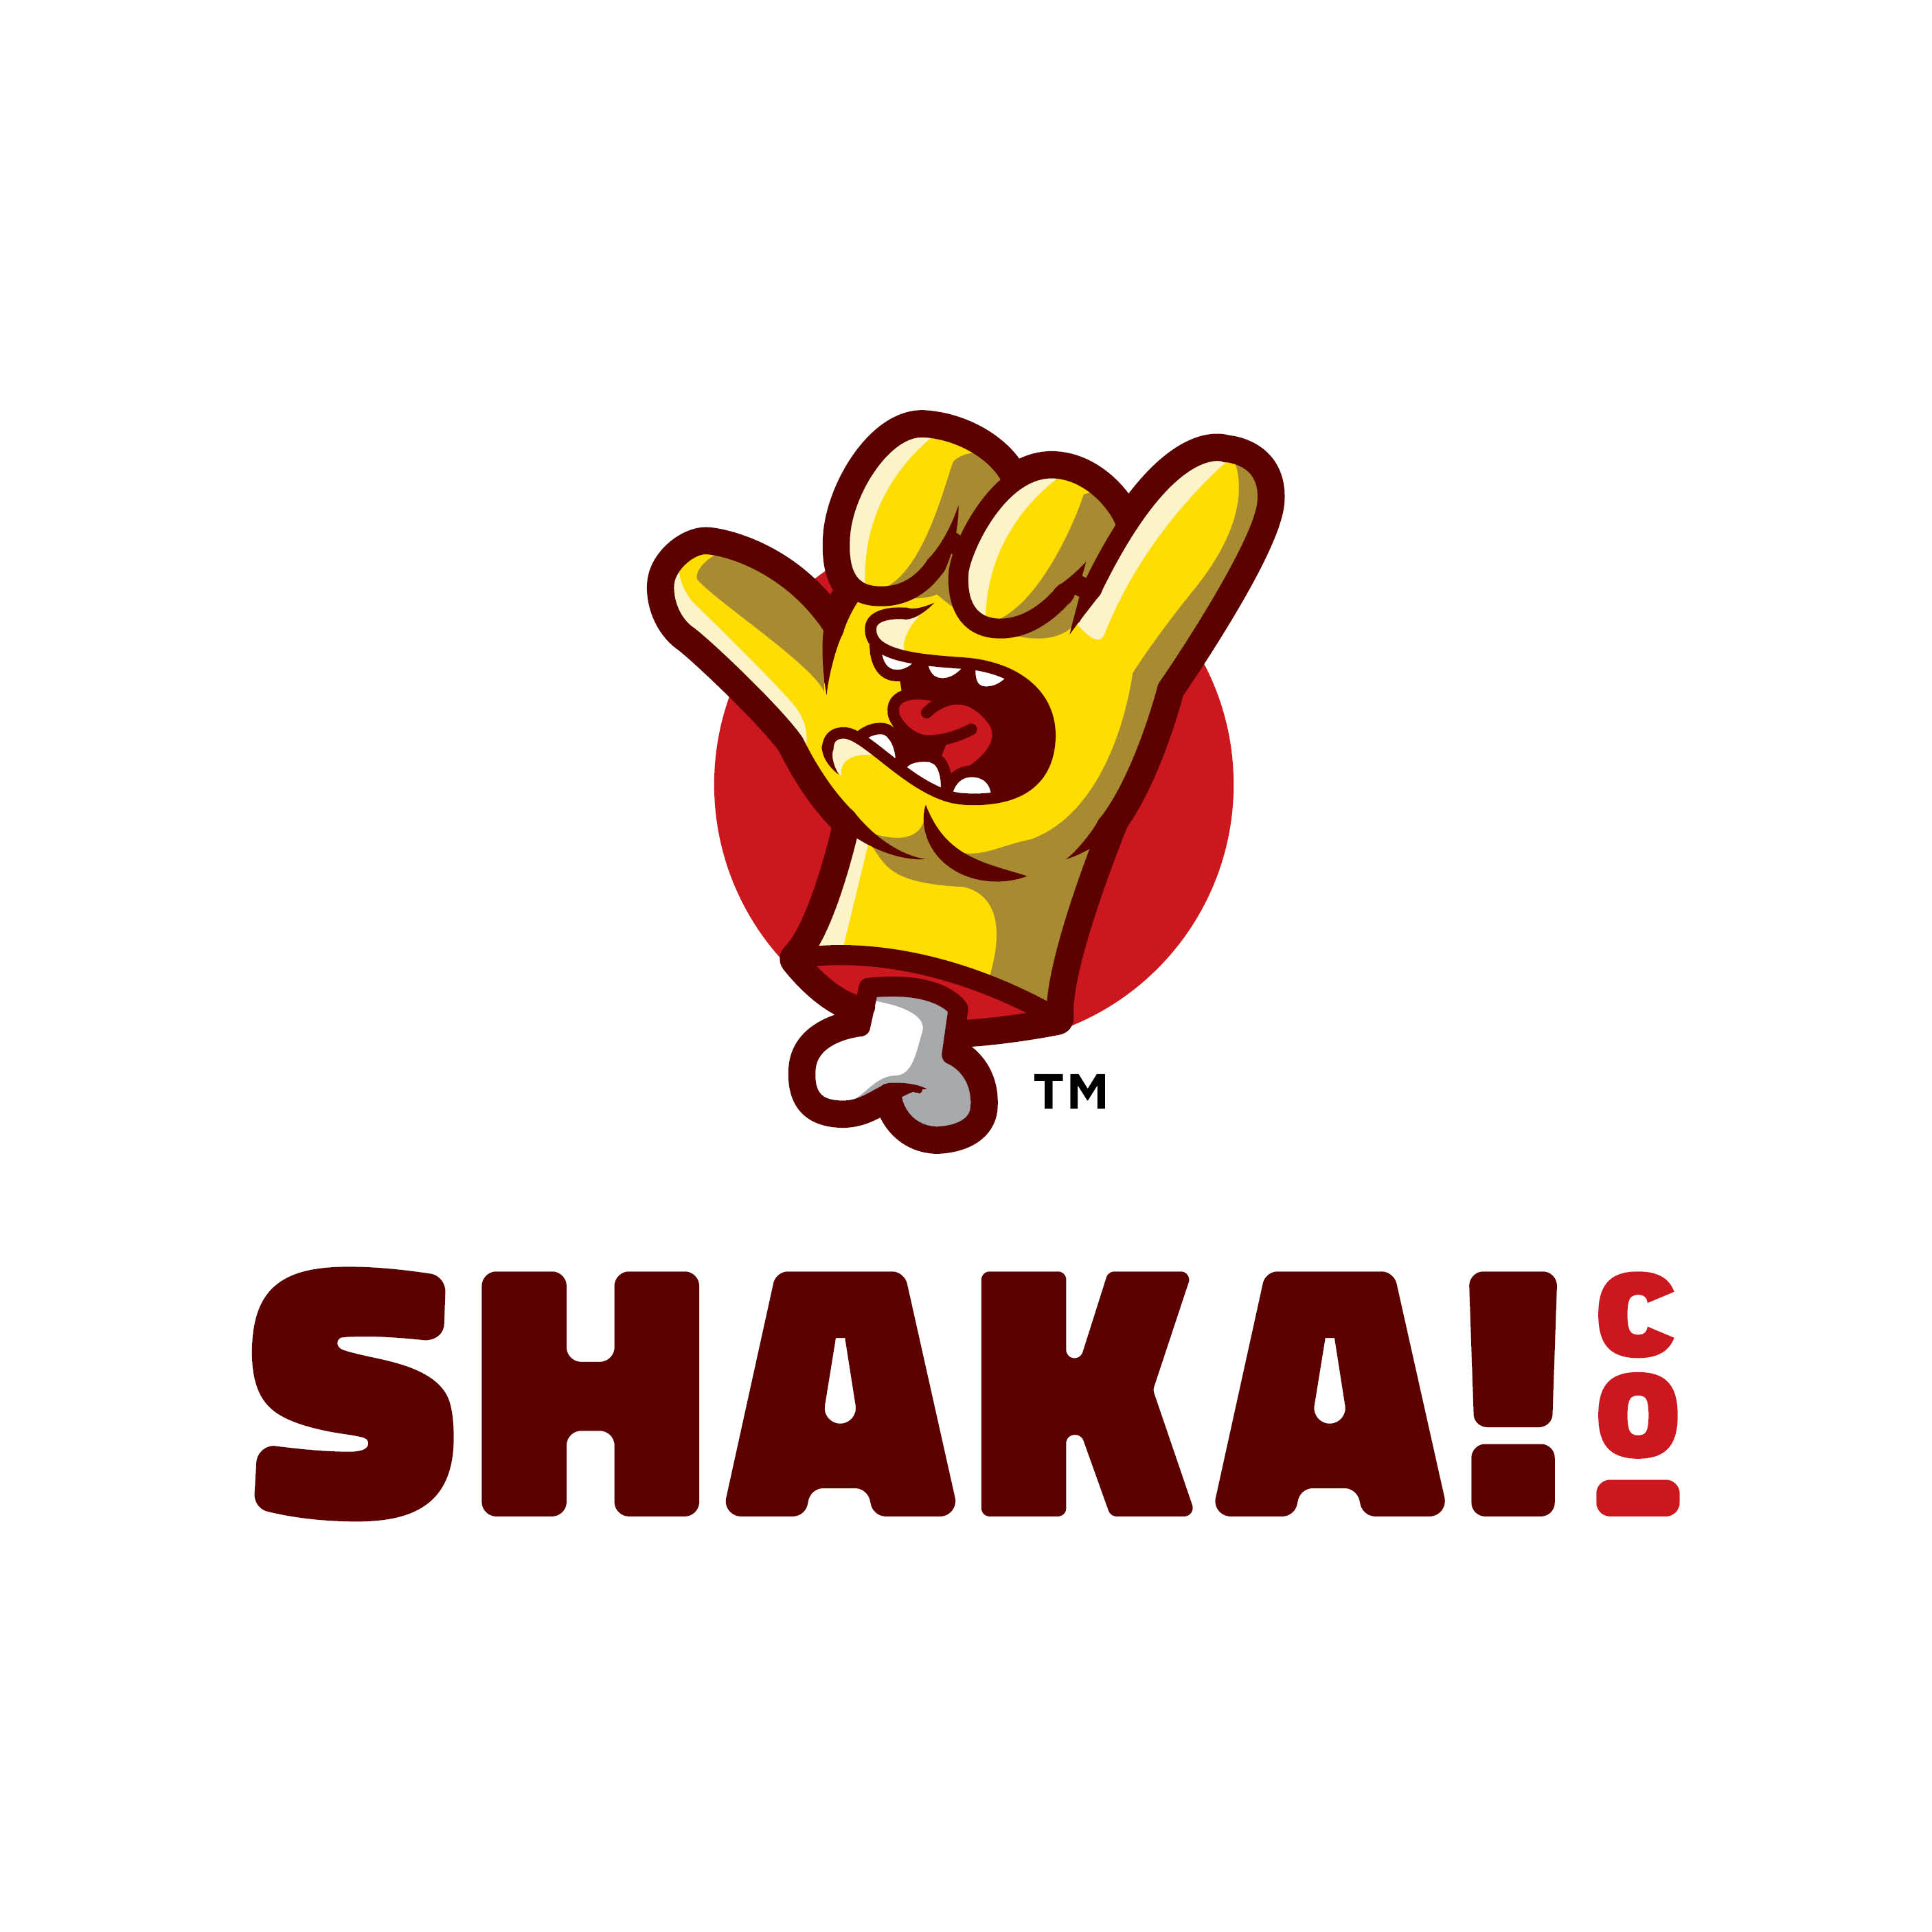 SHAKA logo design by logo designer Duffy Design Co for your inspiration and for the worlds largest logo competition